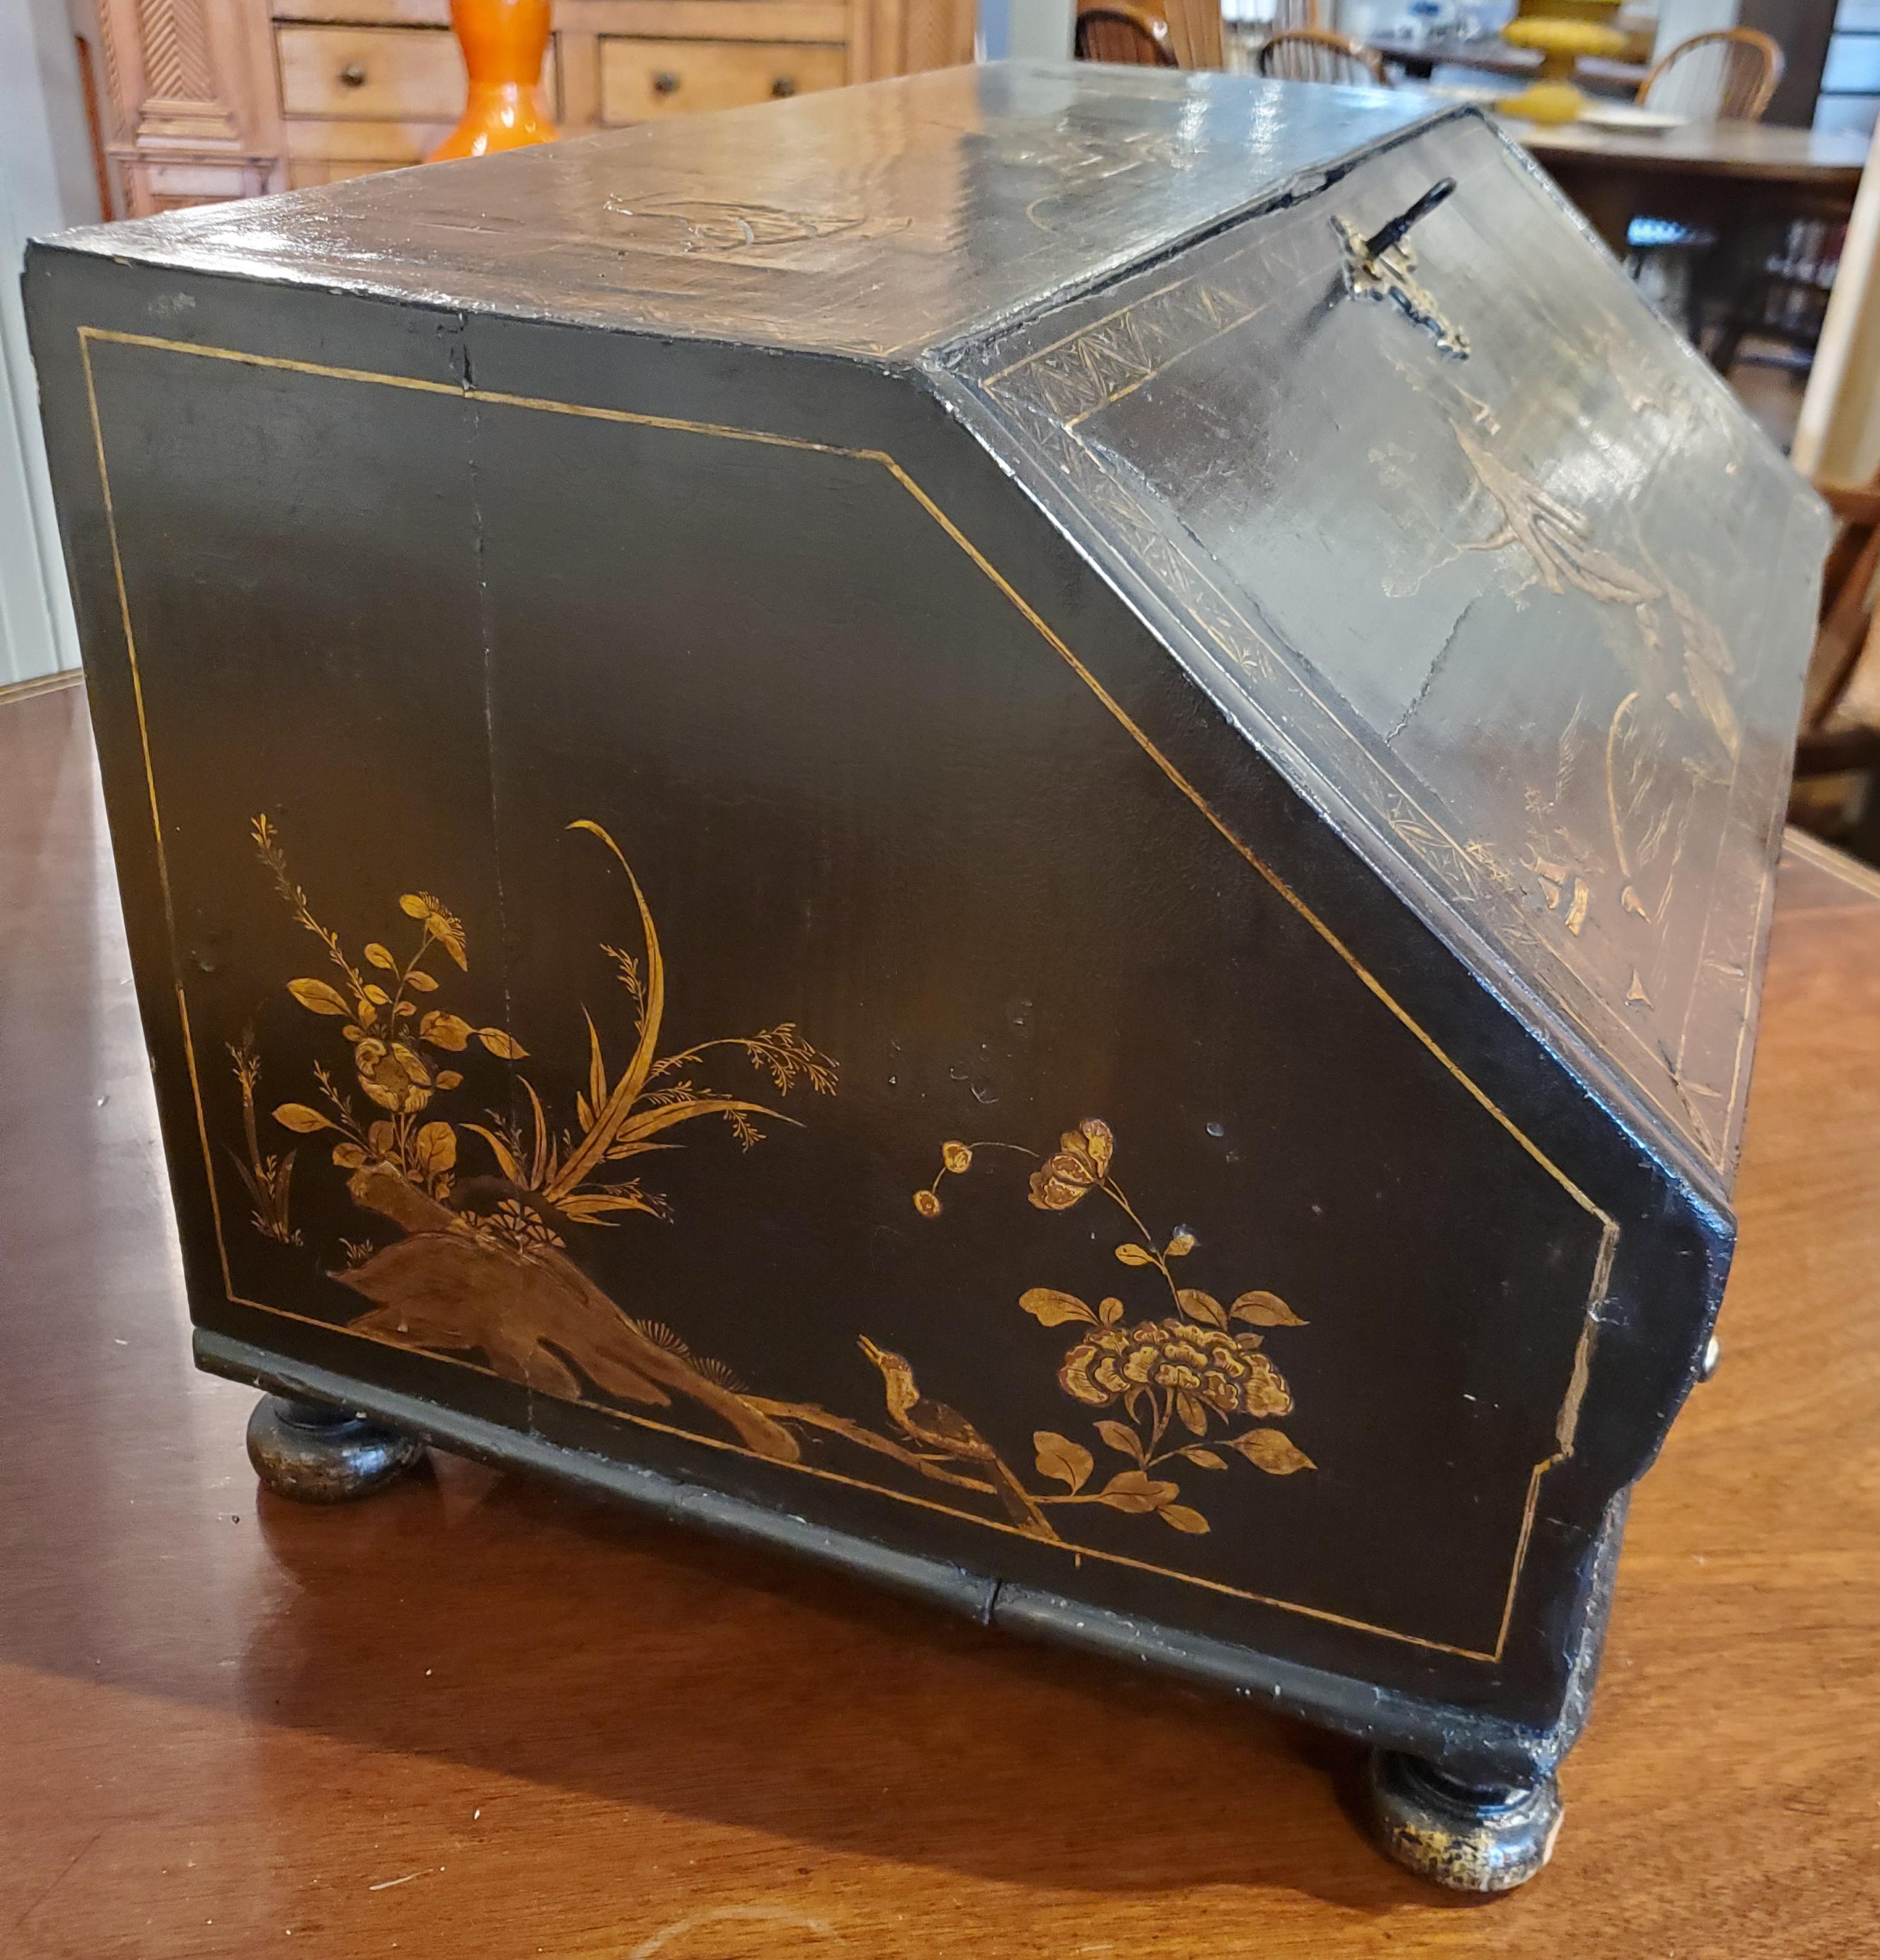 Rare 18th century black lacquer Chinese export writing desk with chinoiserie decoration. Unusual small size, made to be table mounted with fitted interior and retaining original brass hardware. Beautiful decorative edition to any Asian influenced